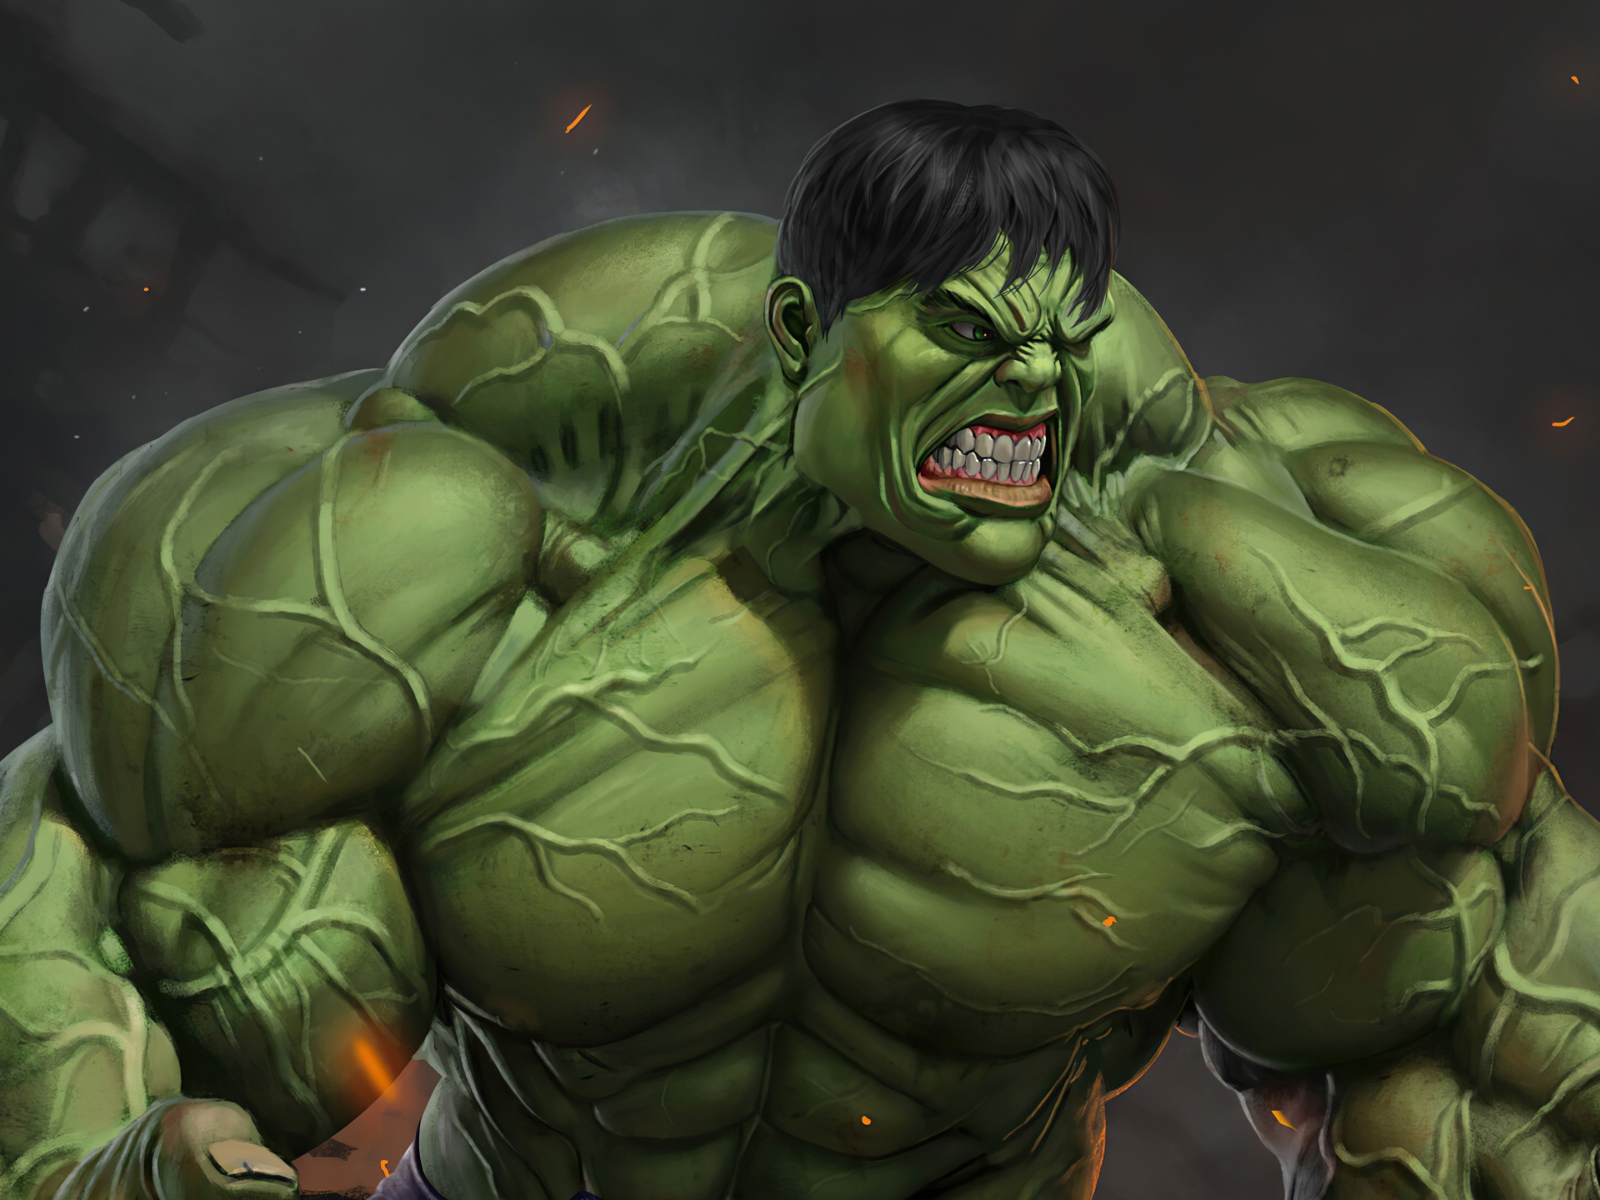 The enraged green hulk goes on the attack